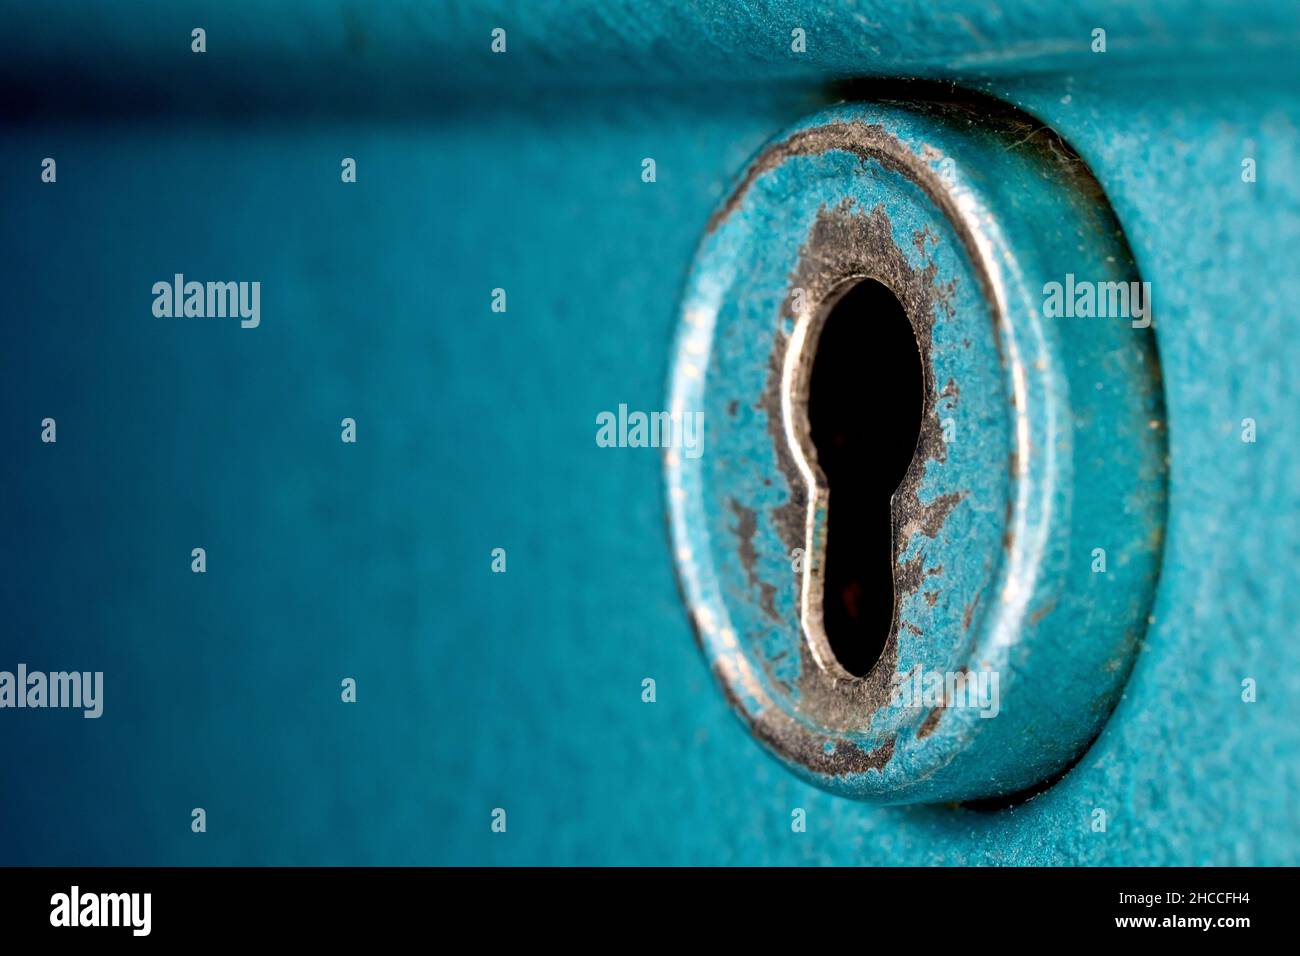 Close up still life of the round keyhole on an old blue metal cashbox. Stock Photo